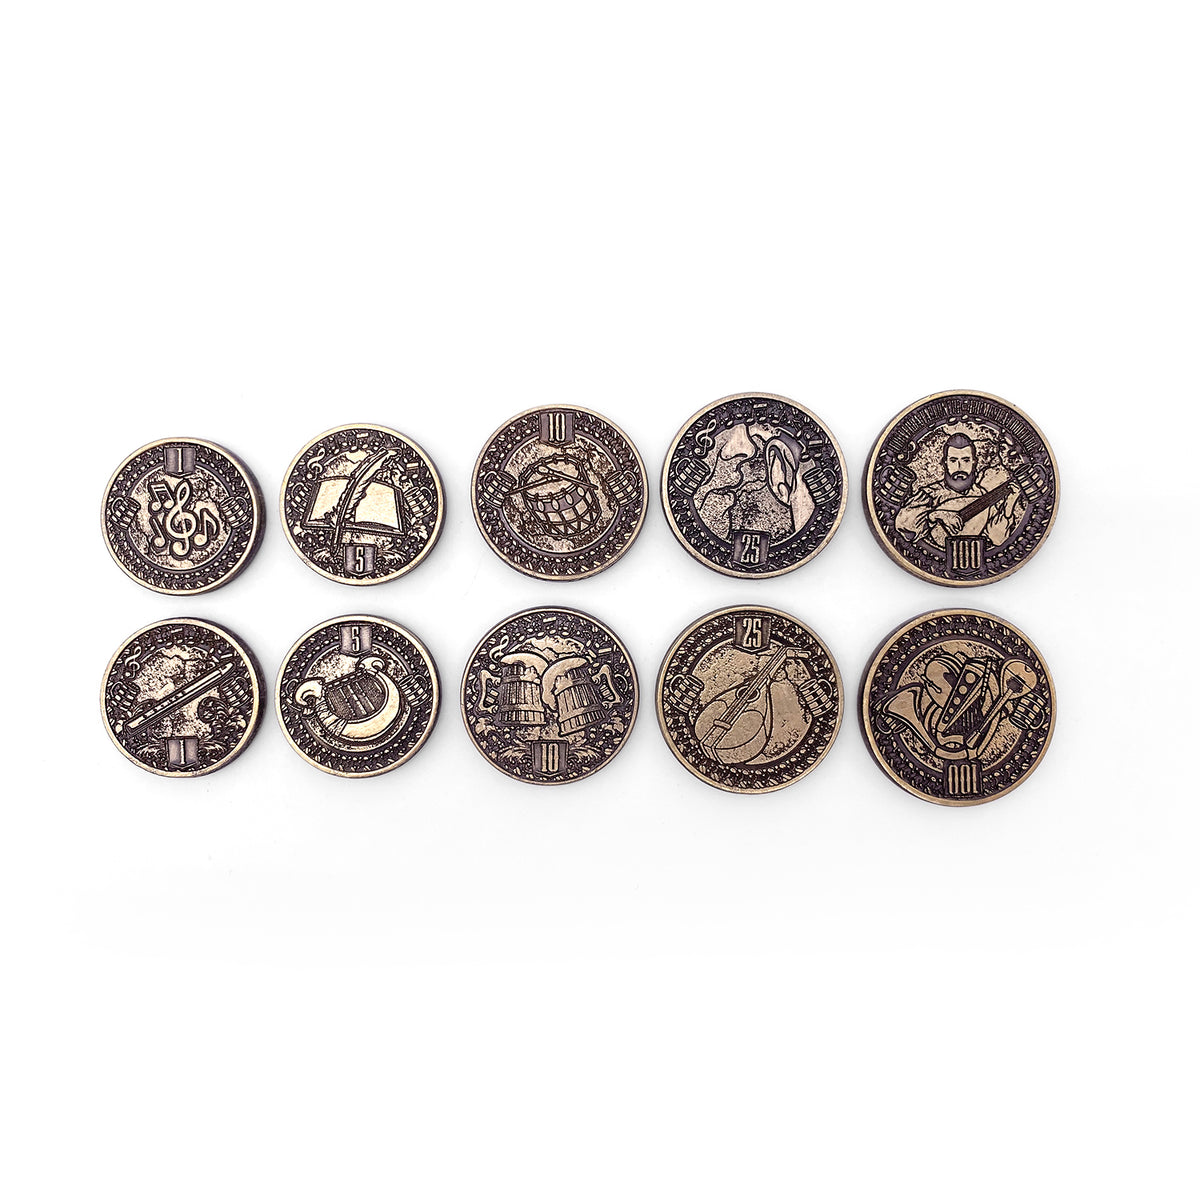 Adventure Coins - Bard Metal Coins Set of 10